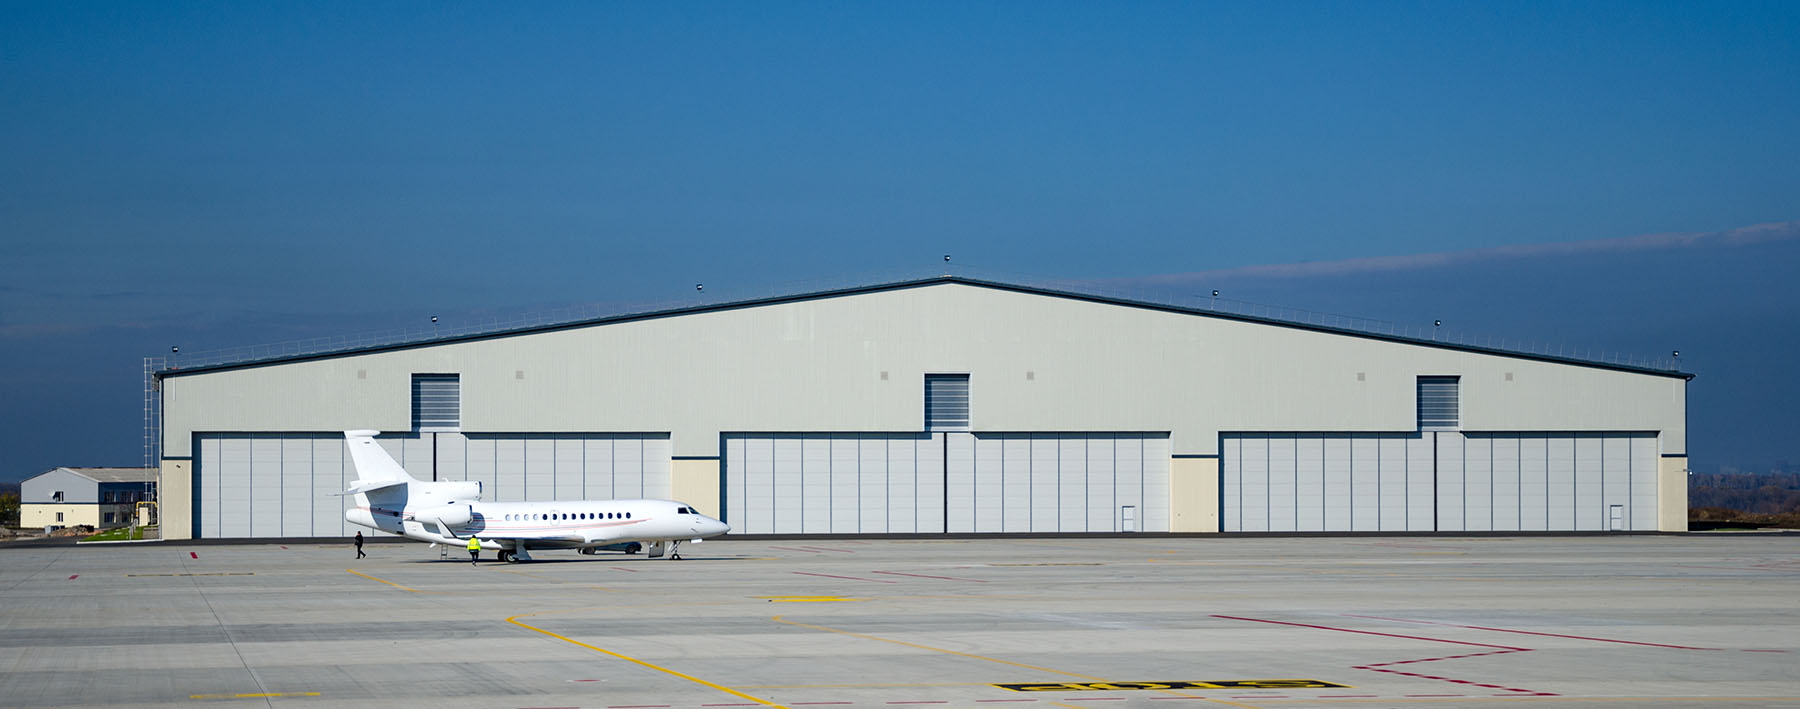 Private Aviation Hangar Building fully assembled with plane in front